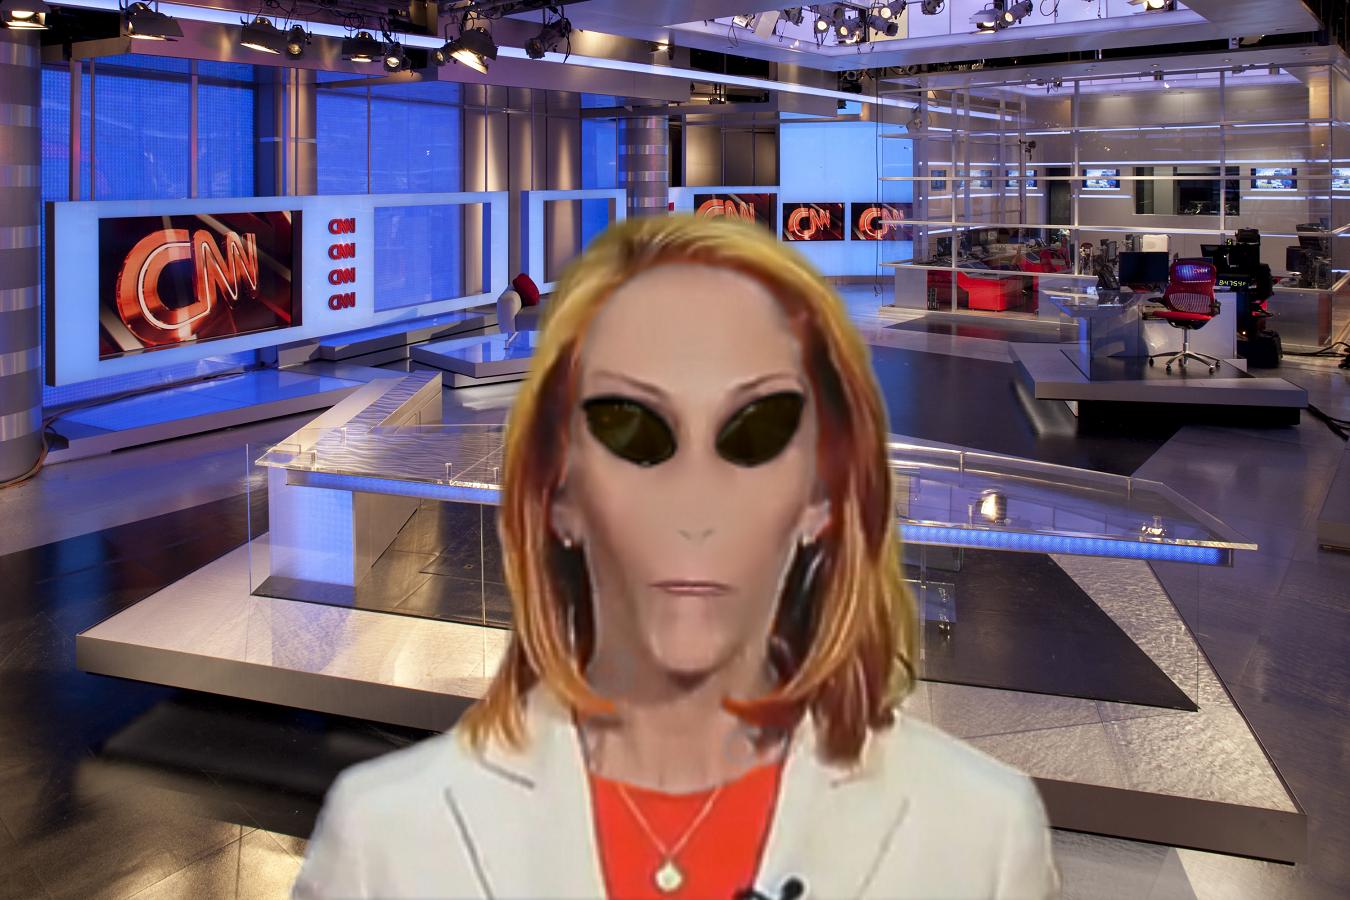 A shocking scene at CNN Studios today reveals That Dana Bash is an undercover Alien agent from Uranus !!